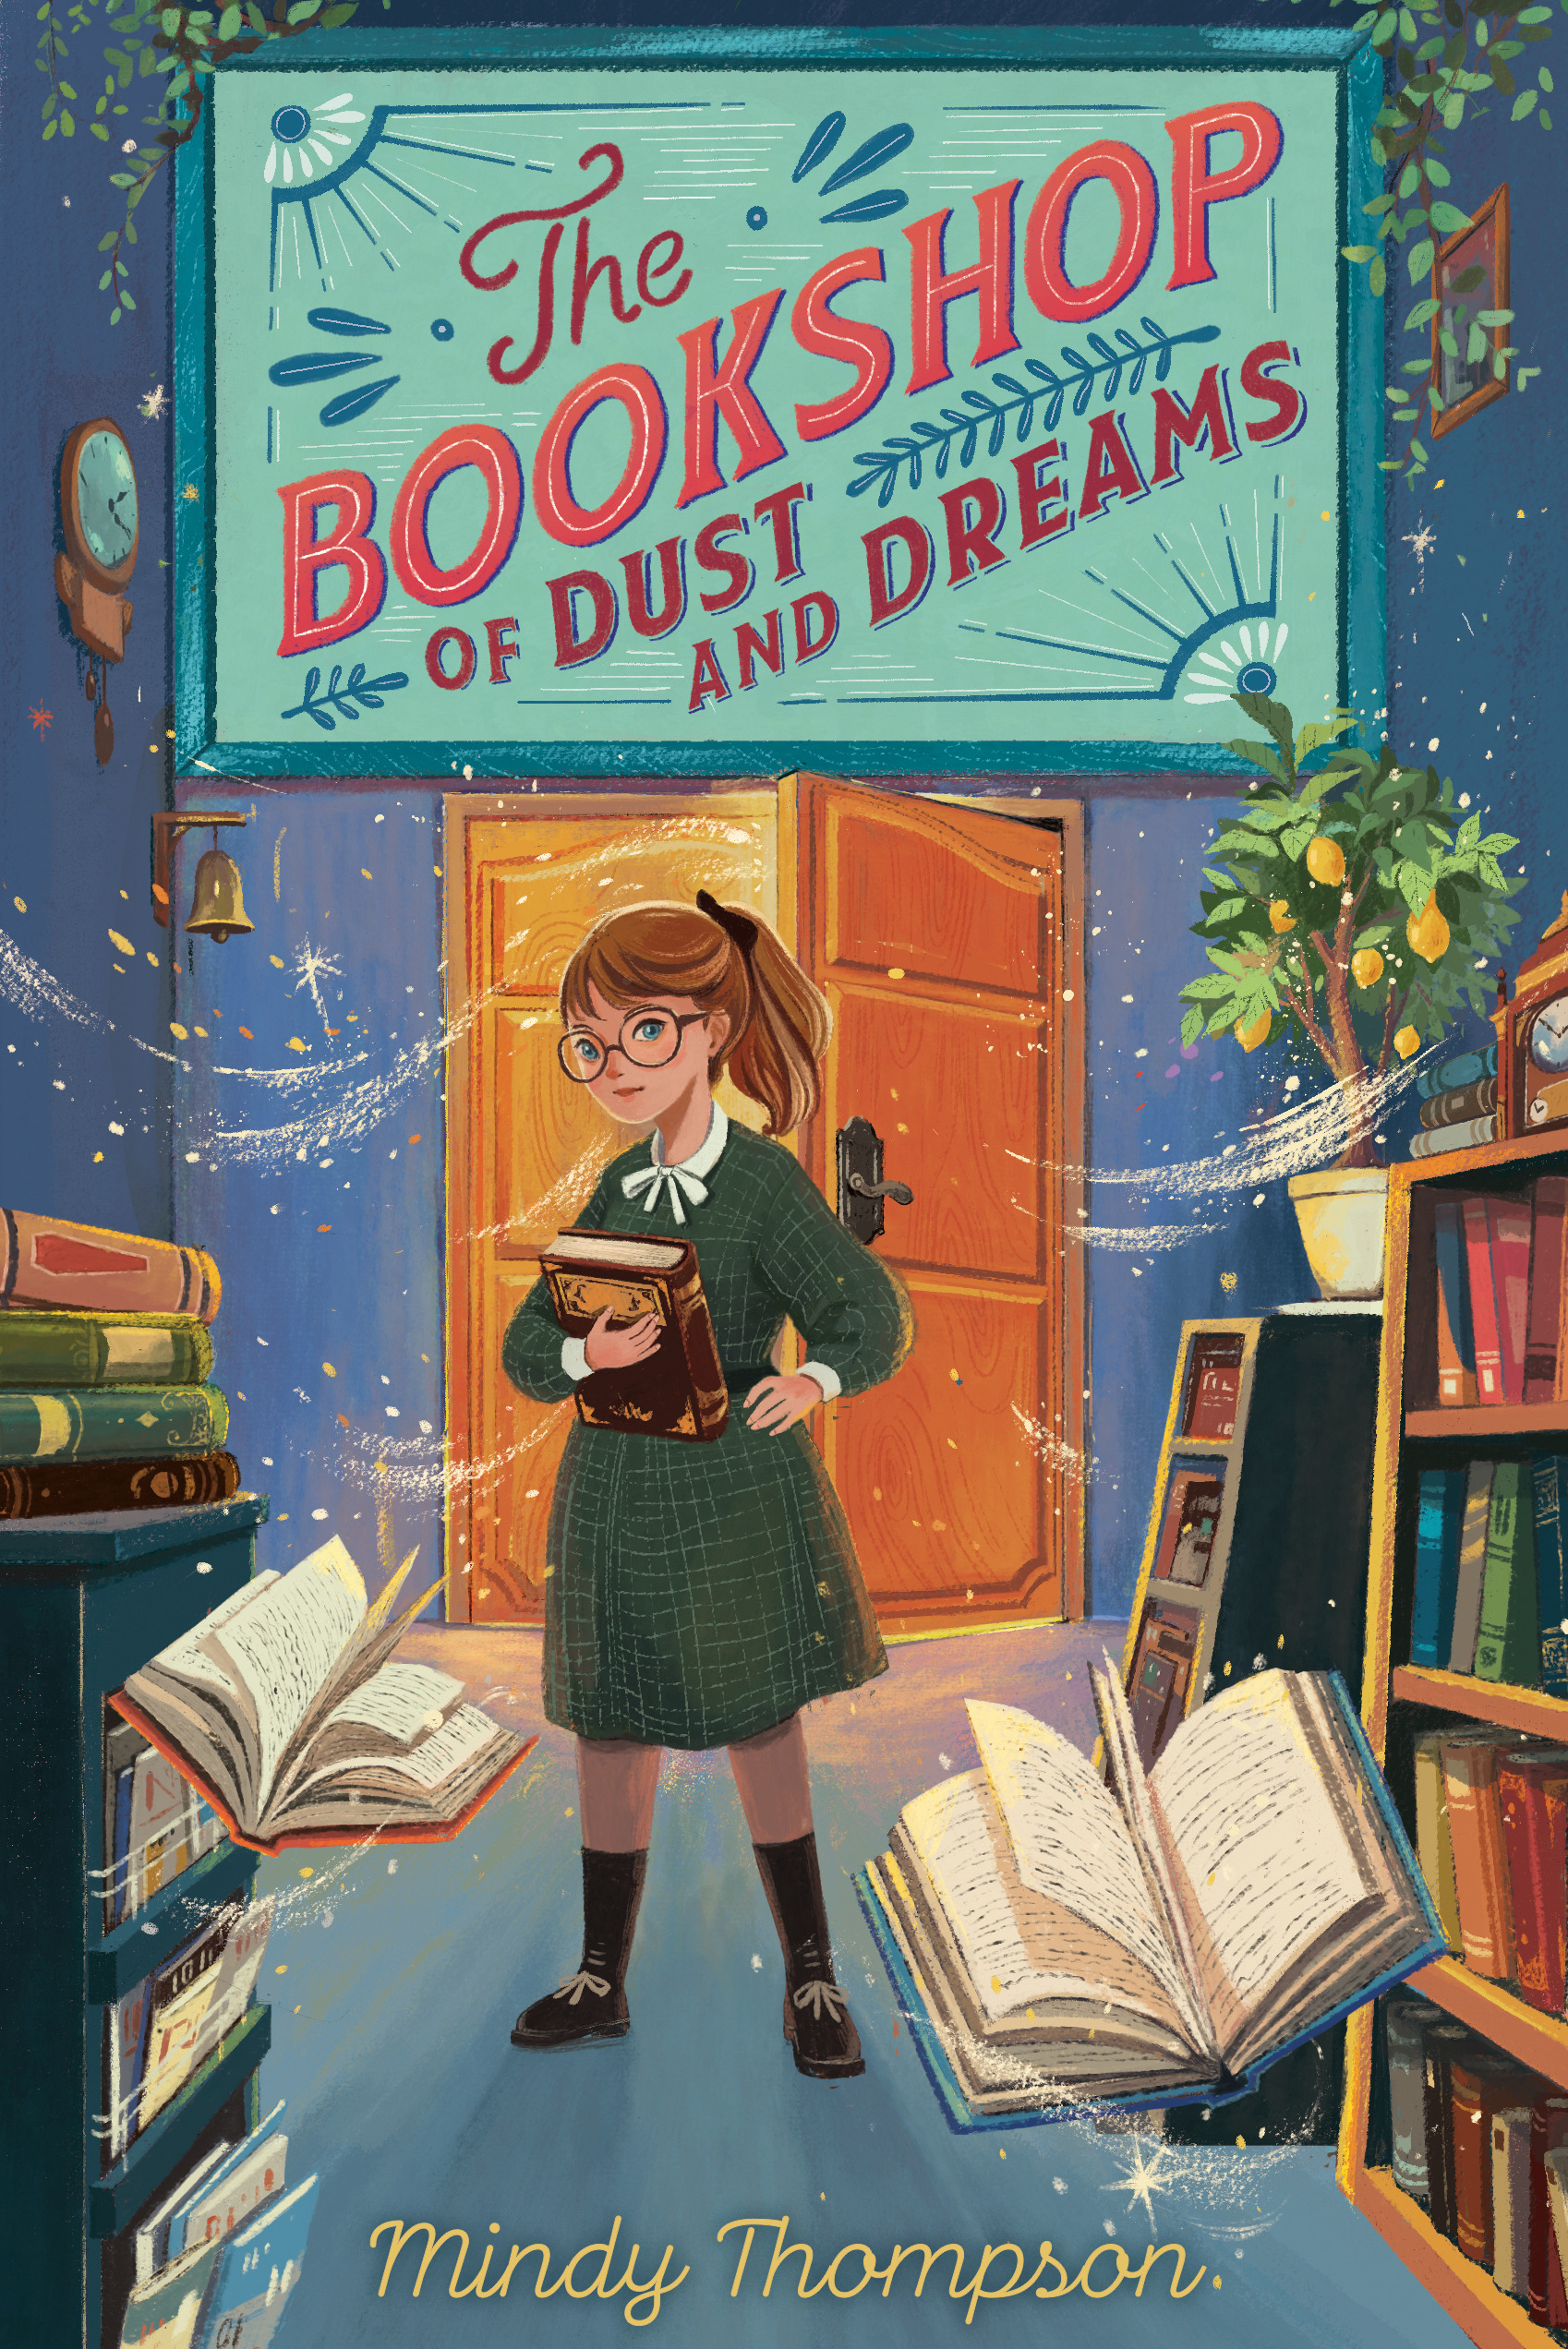 The Bookshop of Dust and Dreams | Thompson, Mindy